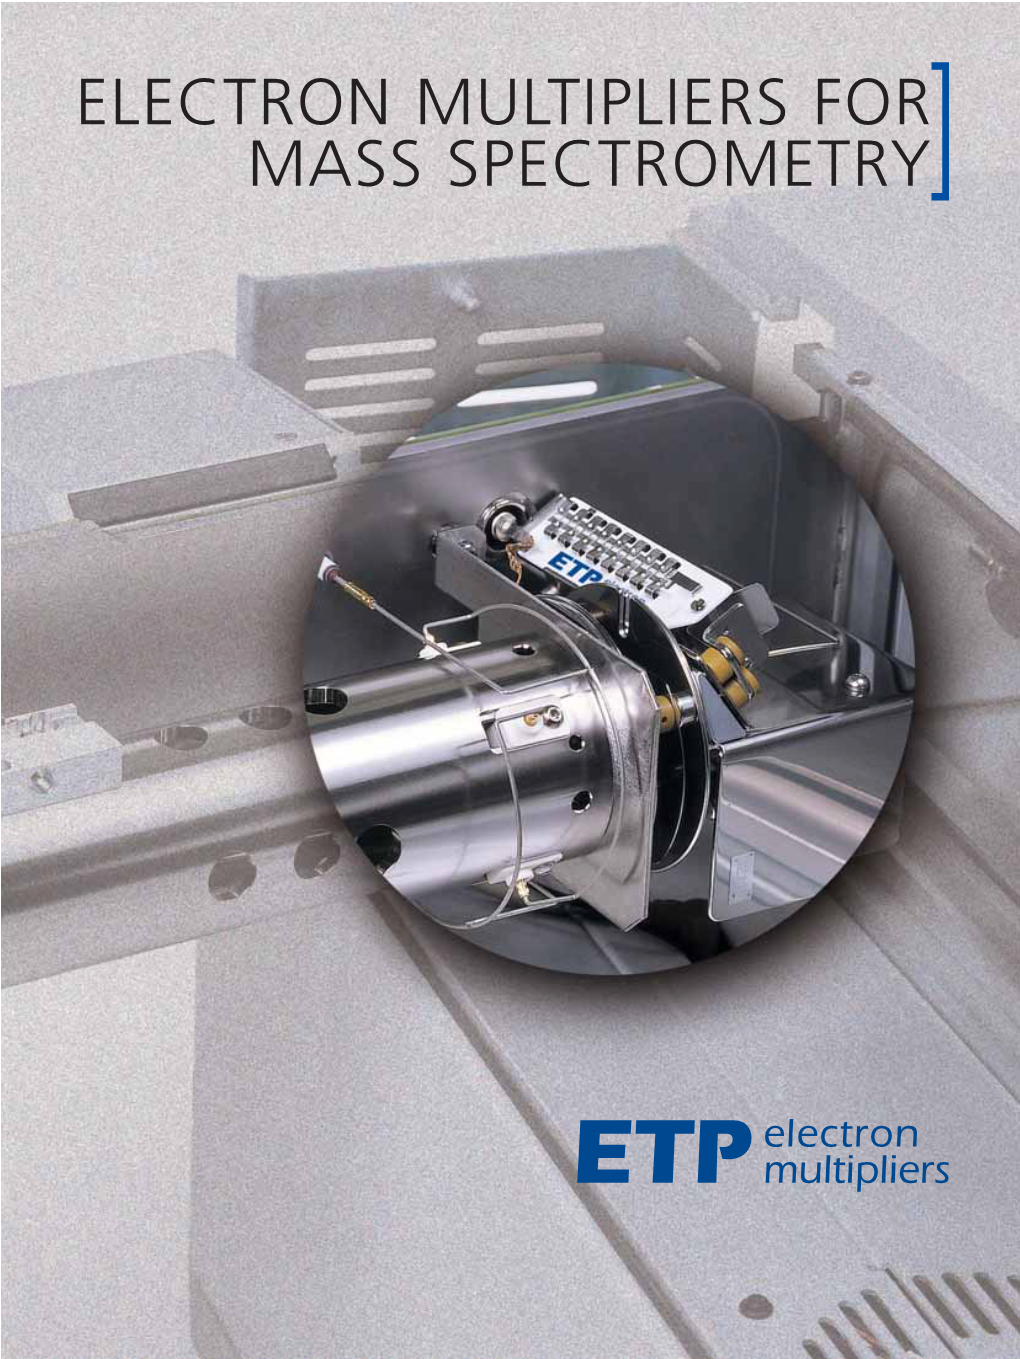 Electron Multipliers for Mass Spectrometry